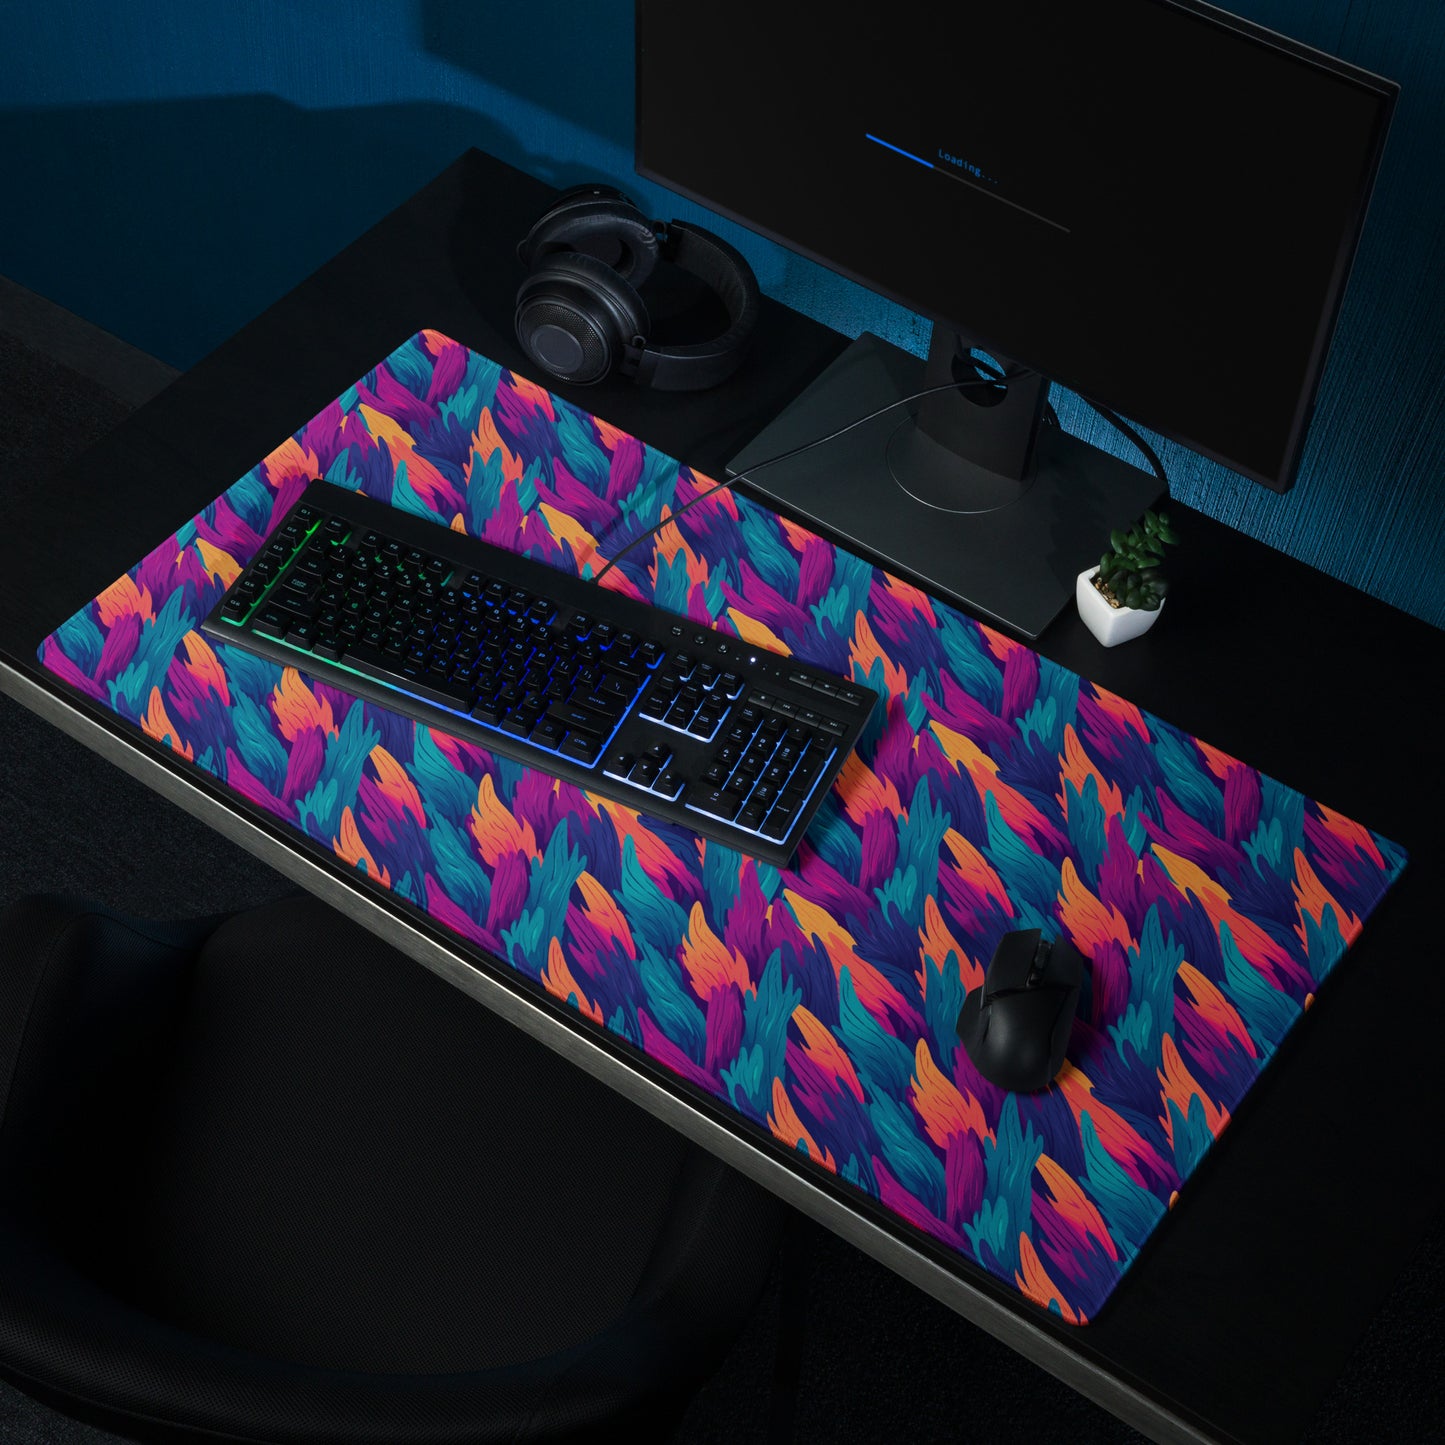 A 36" x 18" desk pad with a wavy flame pattern on it shown on a desk setup. Blue, Orange and Purple in color.